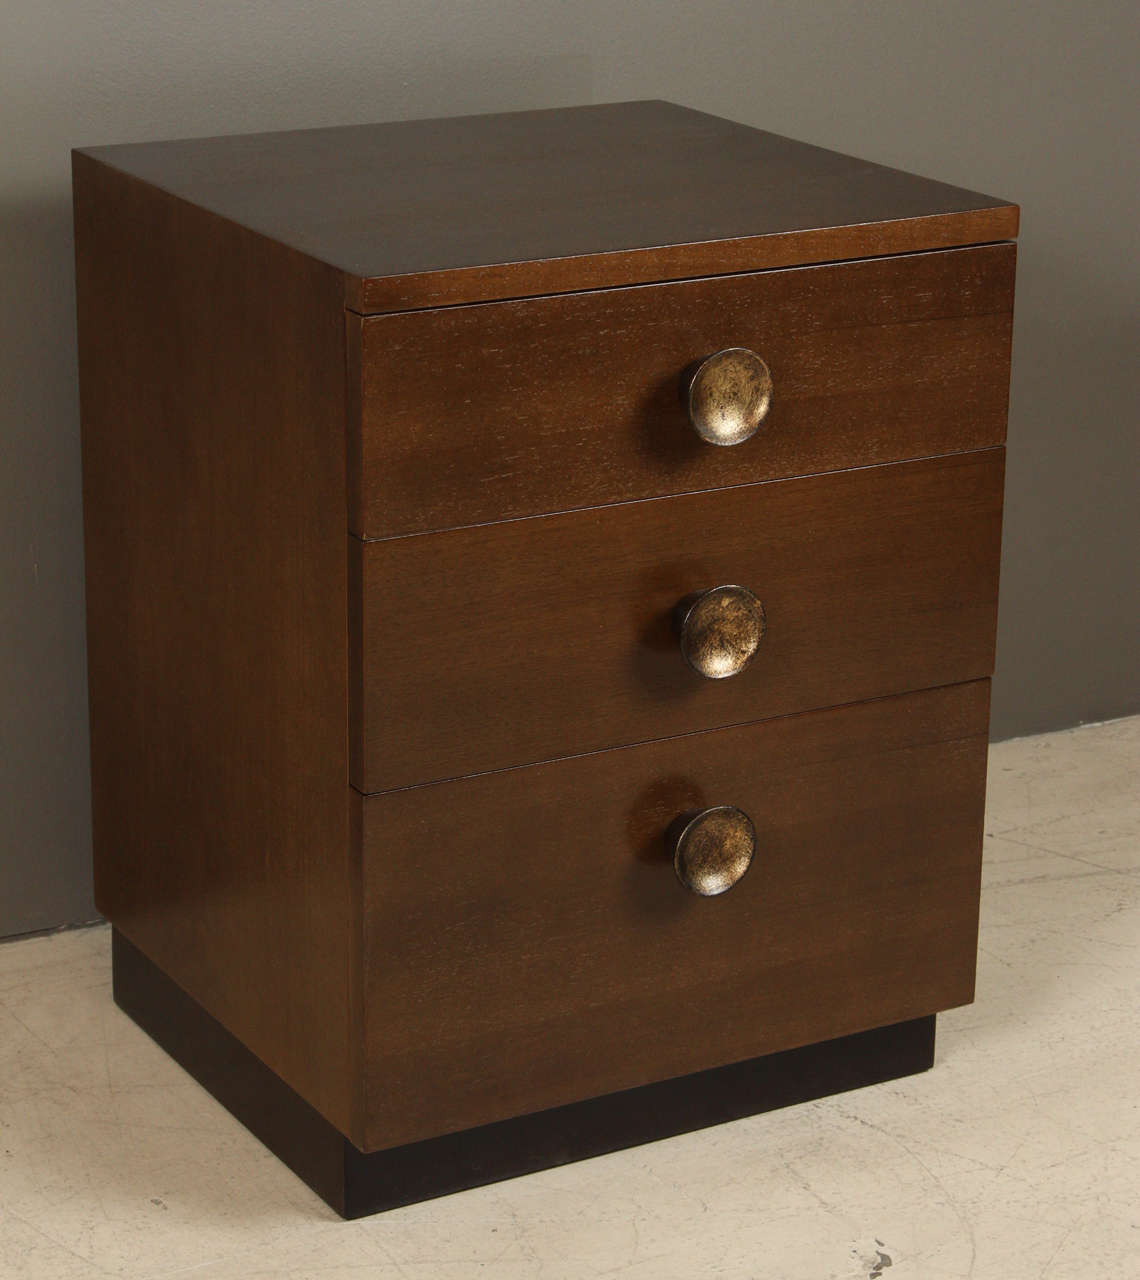 Pair of walnut bedside chests by Gilbert Rohde for Herman Miller.